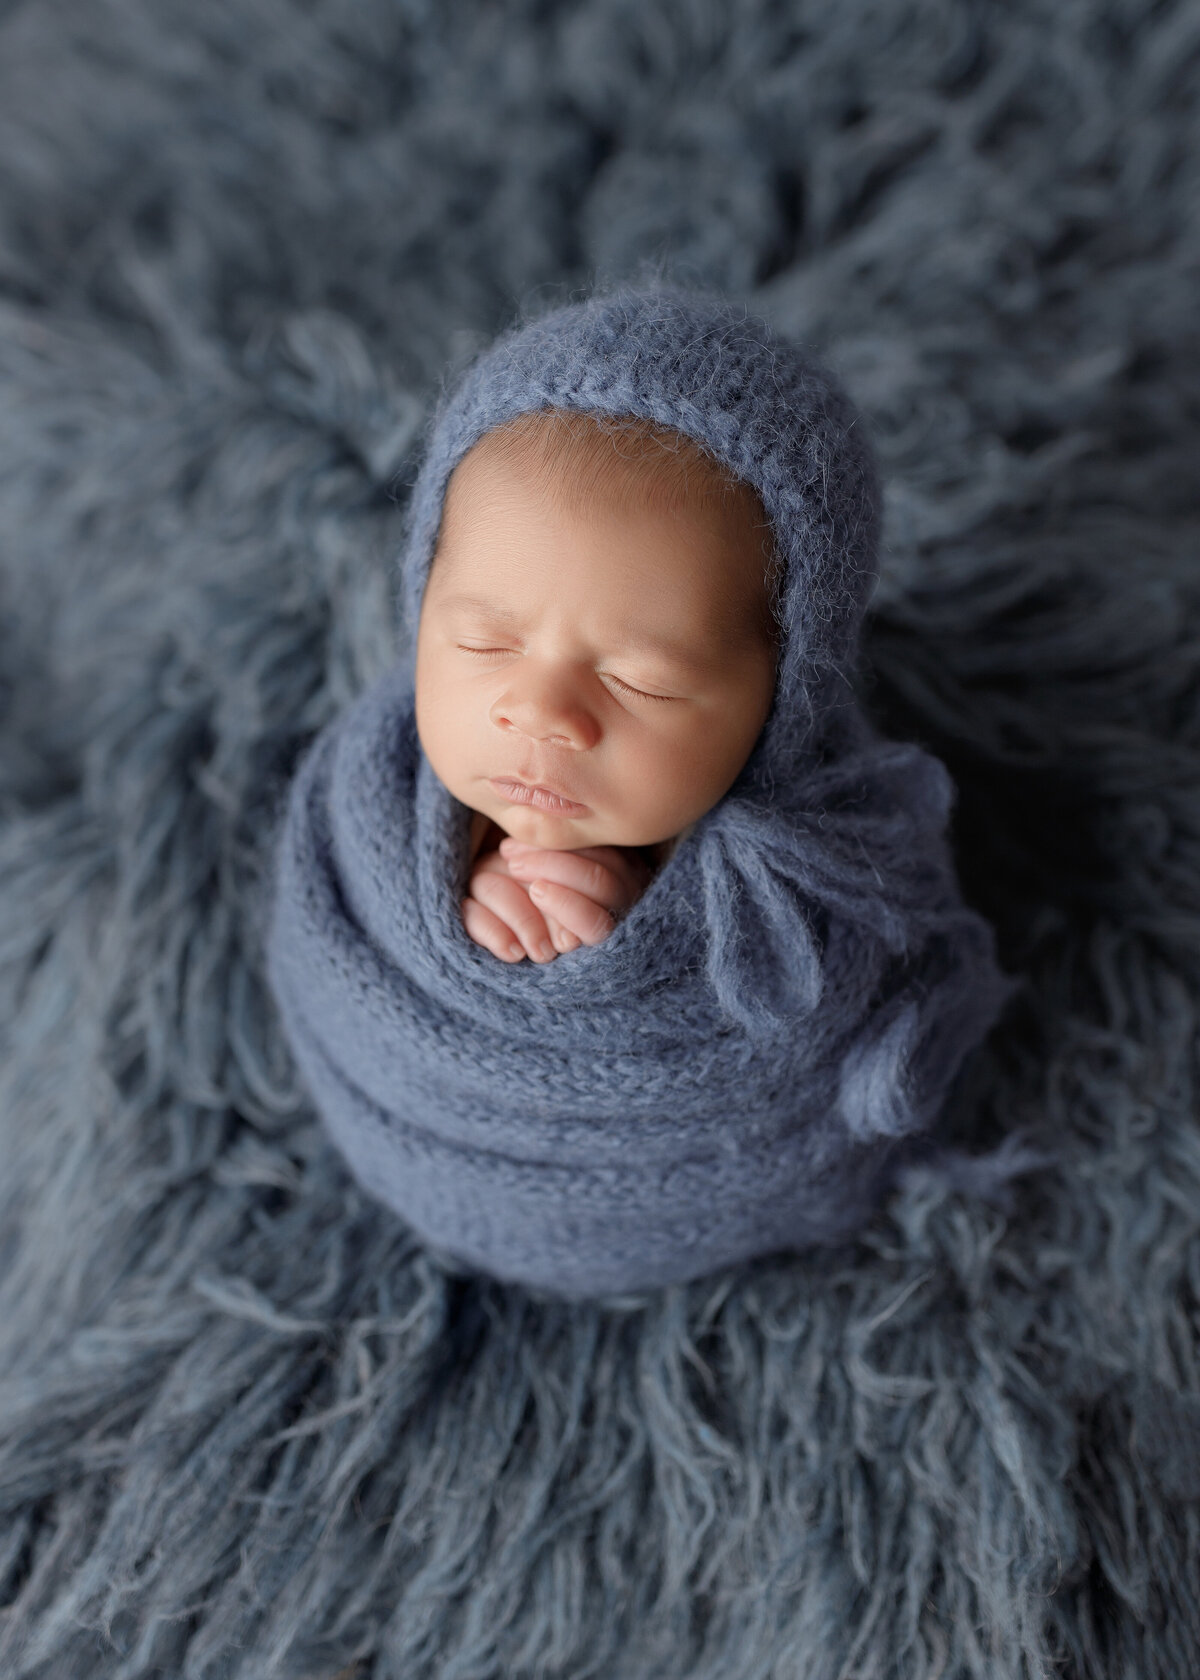 Newborn photoshoot with Lake Worth newborn photographer. Baby is wrapped in a blue knit swaddle with his hands peeking out of the top. Baby boy is sleeping wearing a matching blue knit bonnet. Baby is sitting atop of a matching blue furry rug.